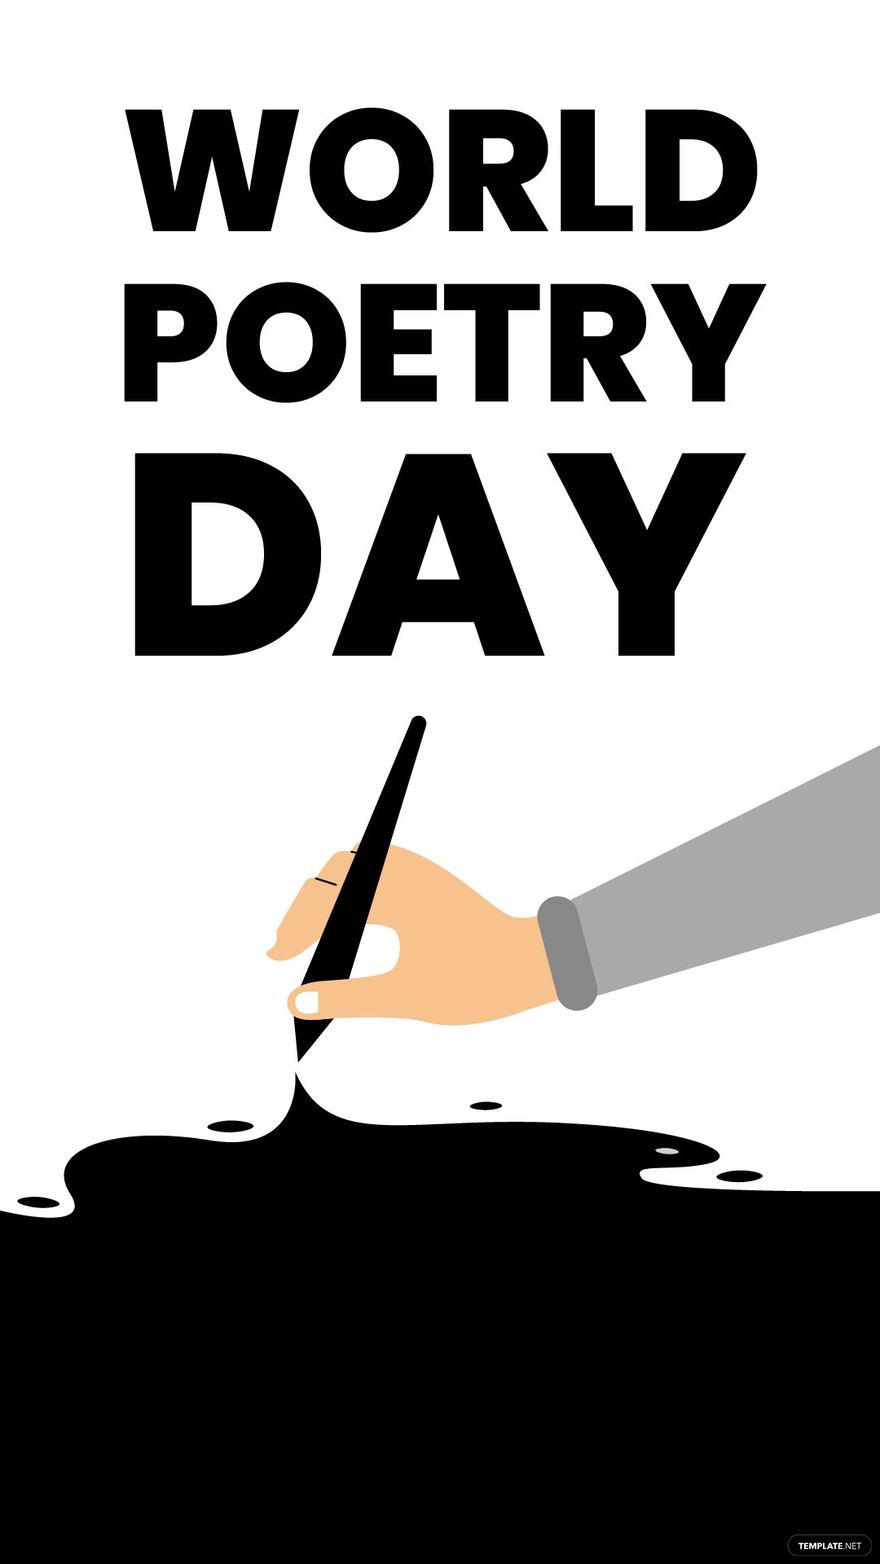 Free World Poetry Day iPhone Background in PDF, Illustrator, PSD, EPS, SVG, JPG, PNG